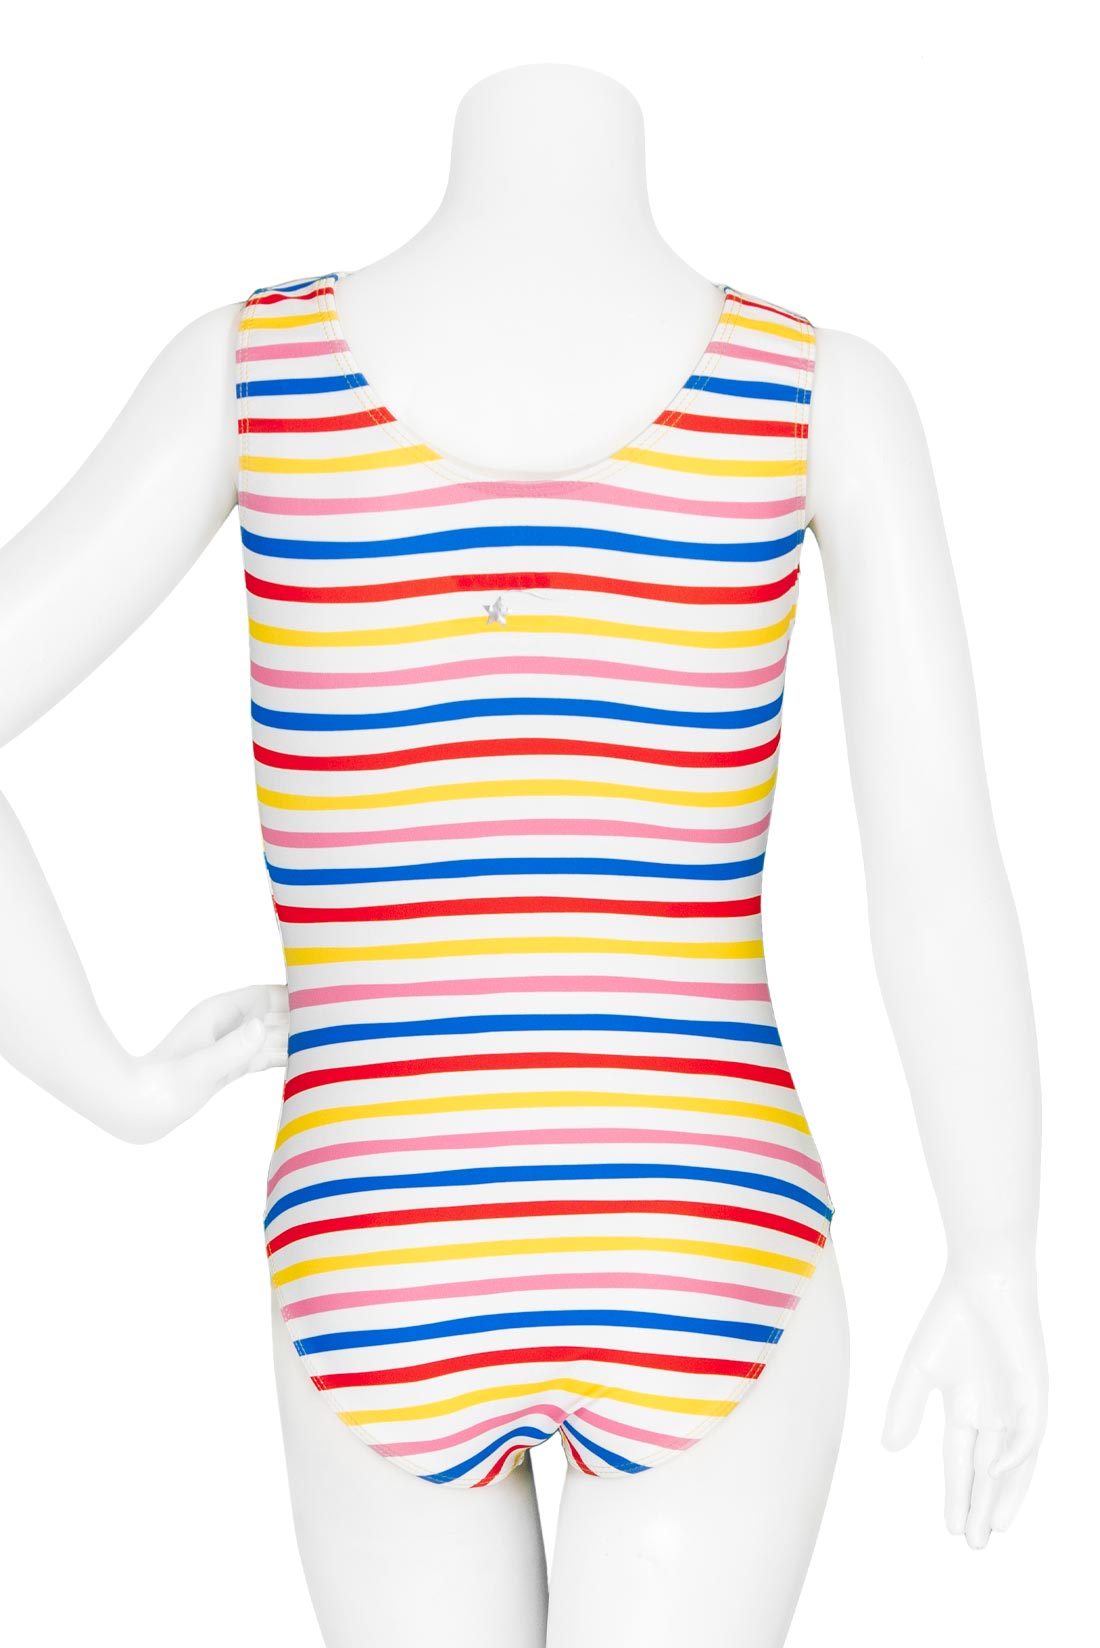 Bright multi-colored stripes on workout leotard for gymnastics by Destira, 2024